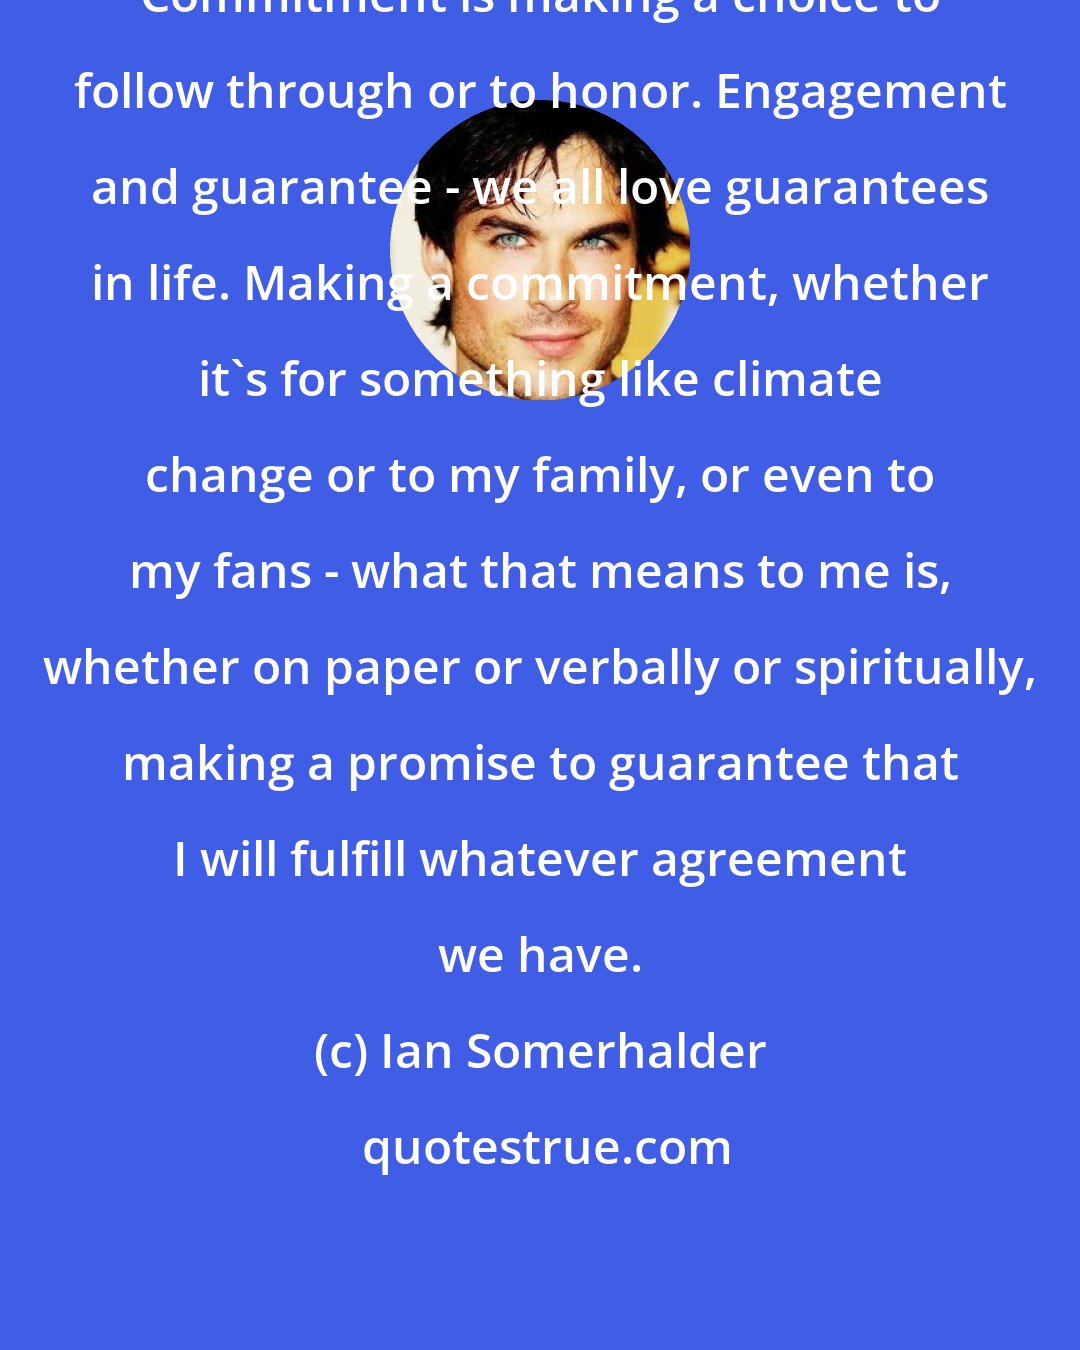 Ian Somerhalder: Commitment is making a choice to follow through or to honor. Engagement and guarantee - we all love guarantees in life. Making a commitment, whether it's for something like climate change or to my family, or even to my fans - what that means to me is, whether on paper or verbally or spiritually, making a promise to guarantee that I will fulfill whatever agreement we have.